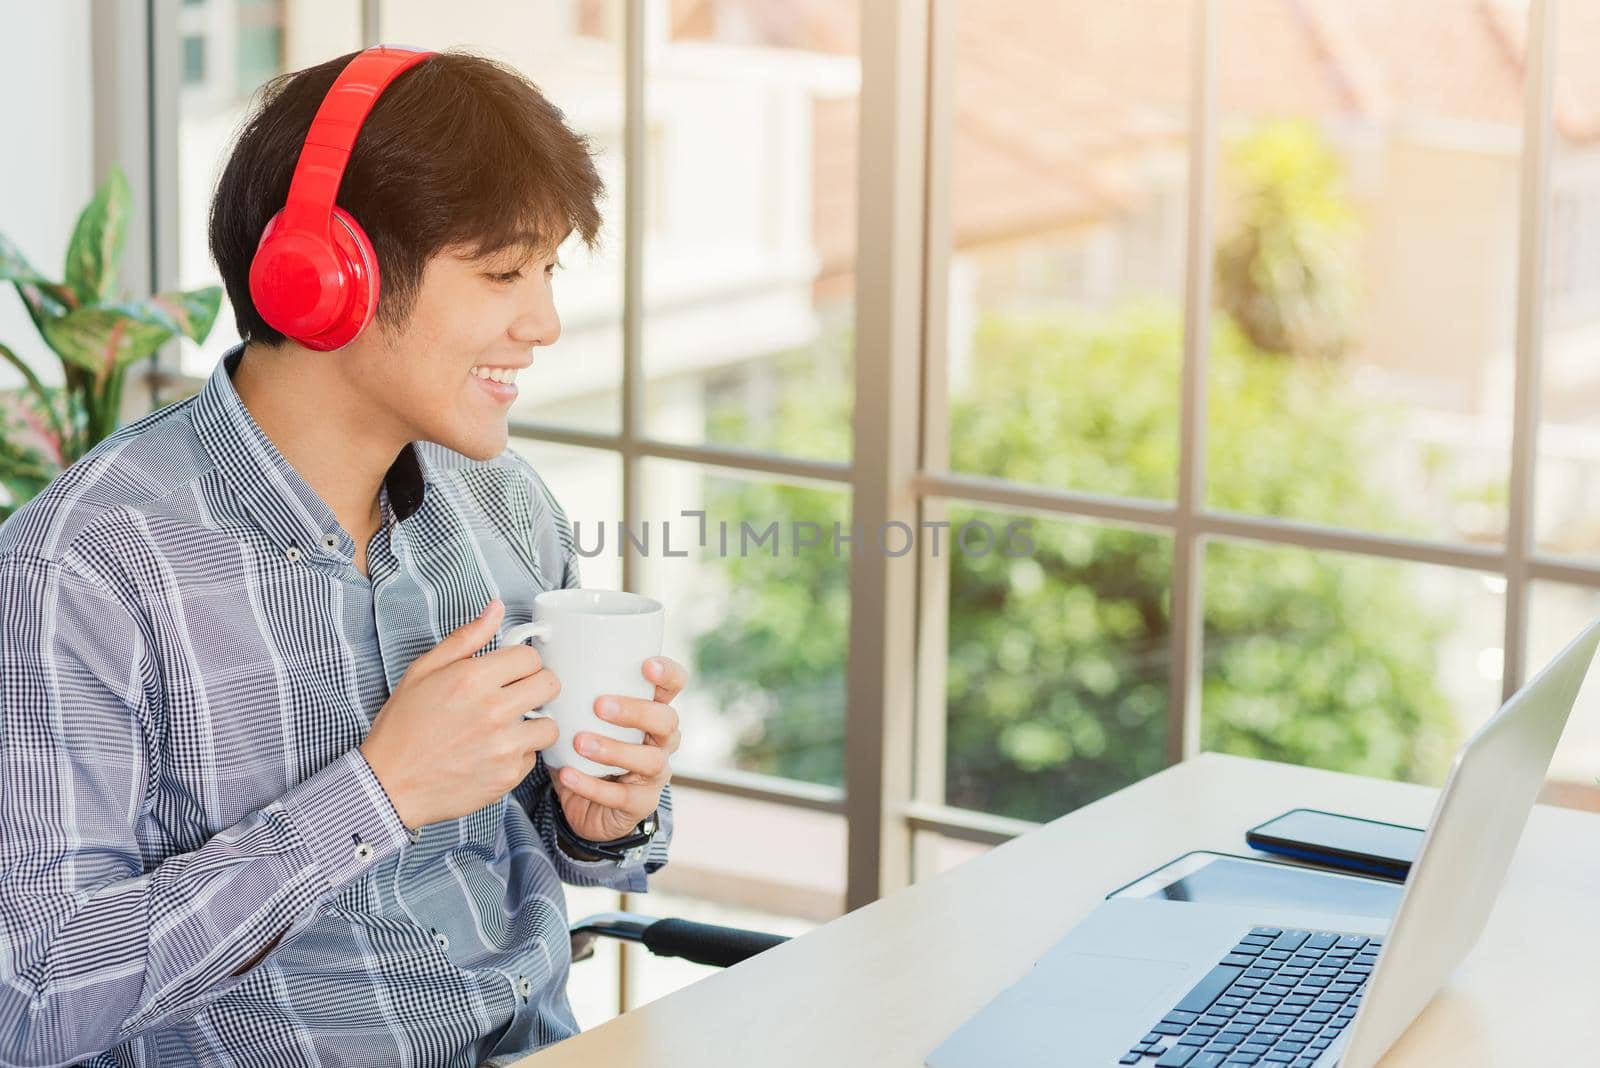 Asian young businessman happiness with red headphones sitting on desk workplace home office with a laptop computer, confident handsome man lifestyle smile relax holding a coffee cup, listens to music